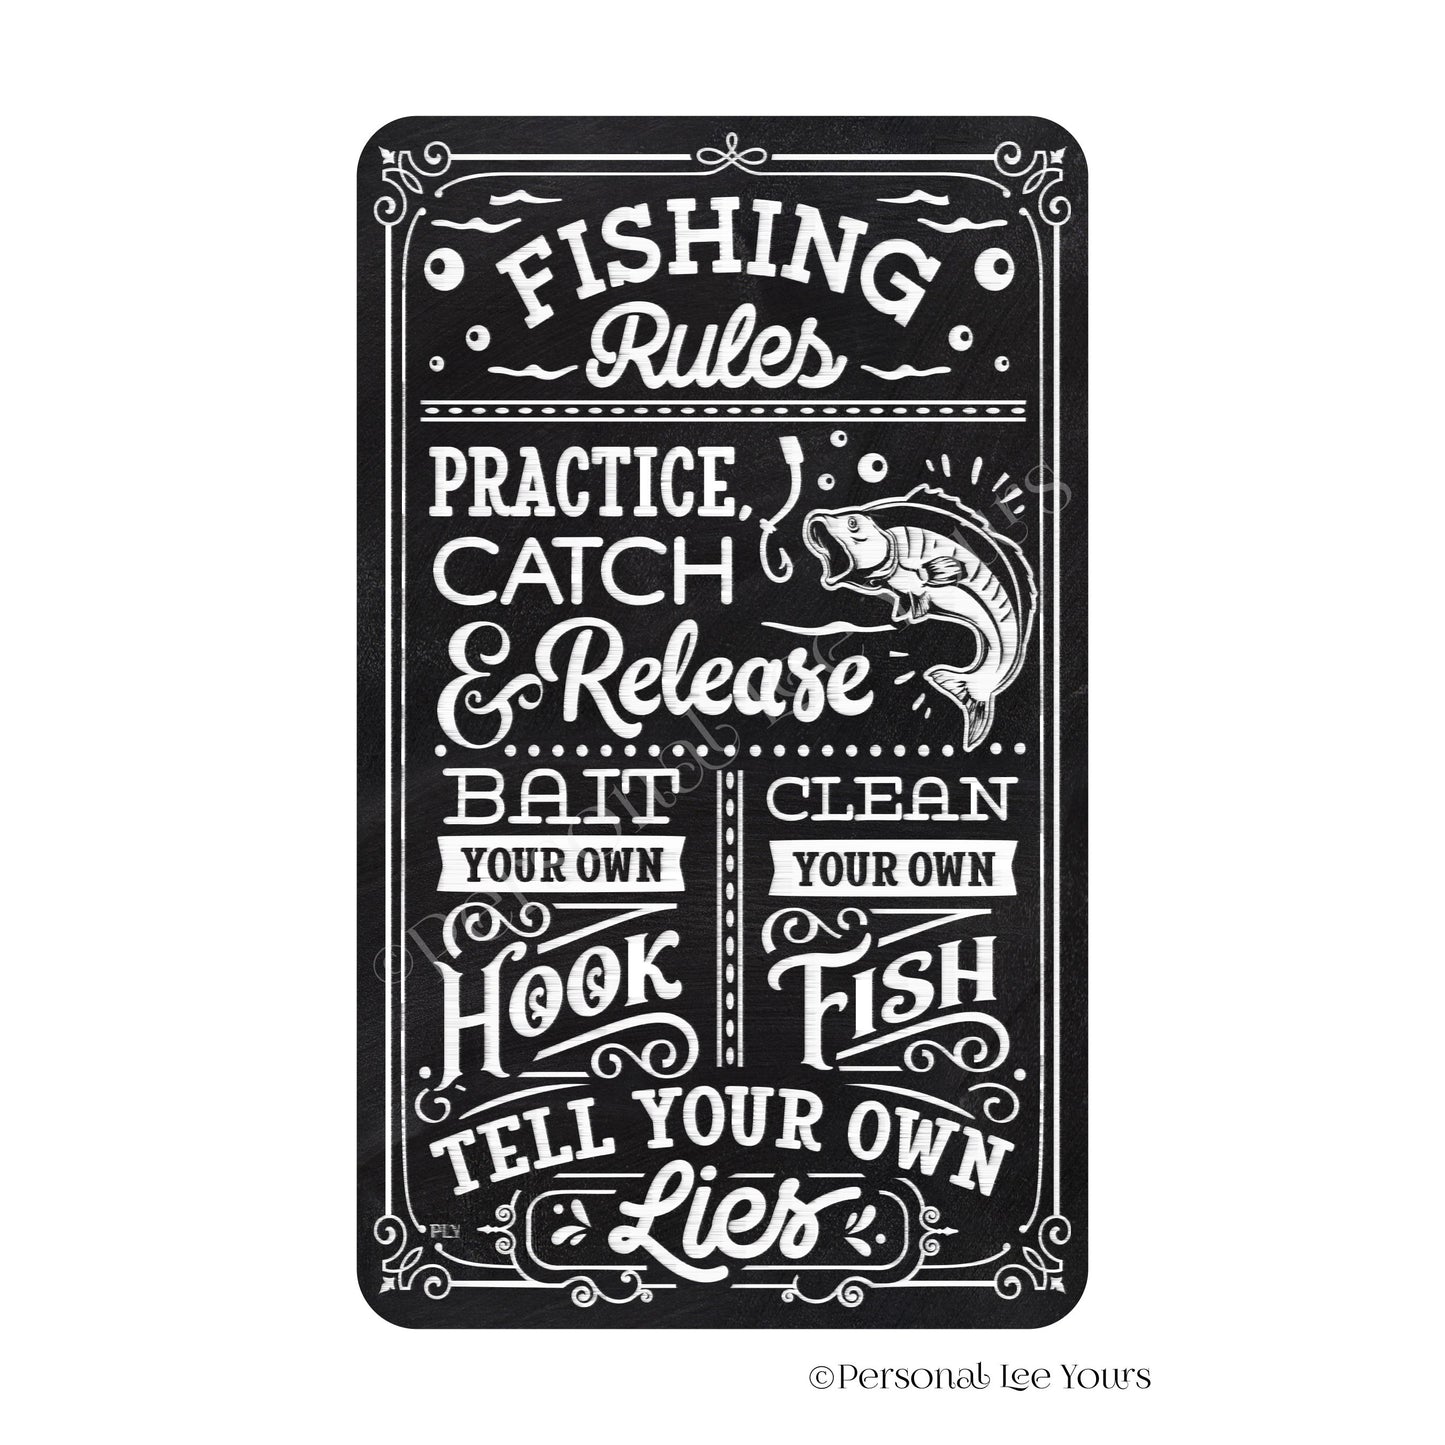 Wreath Sign * Fishing Rules * Vertical * Lightweight Metal * Black, Brown or Green